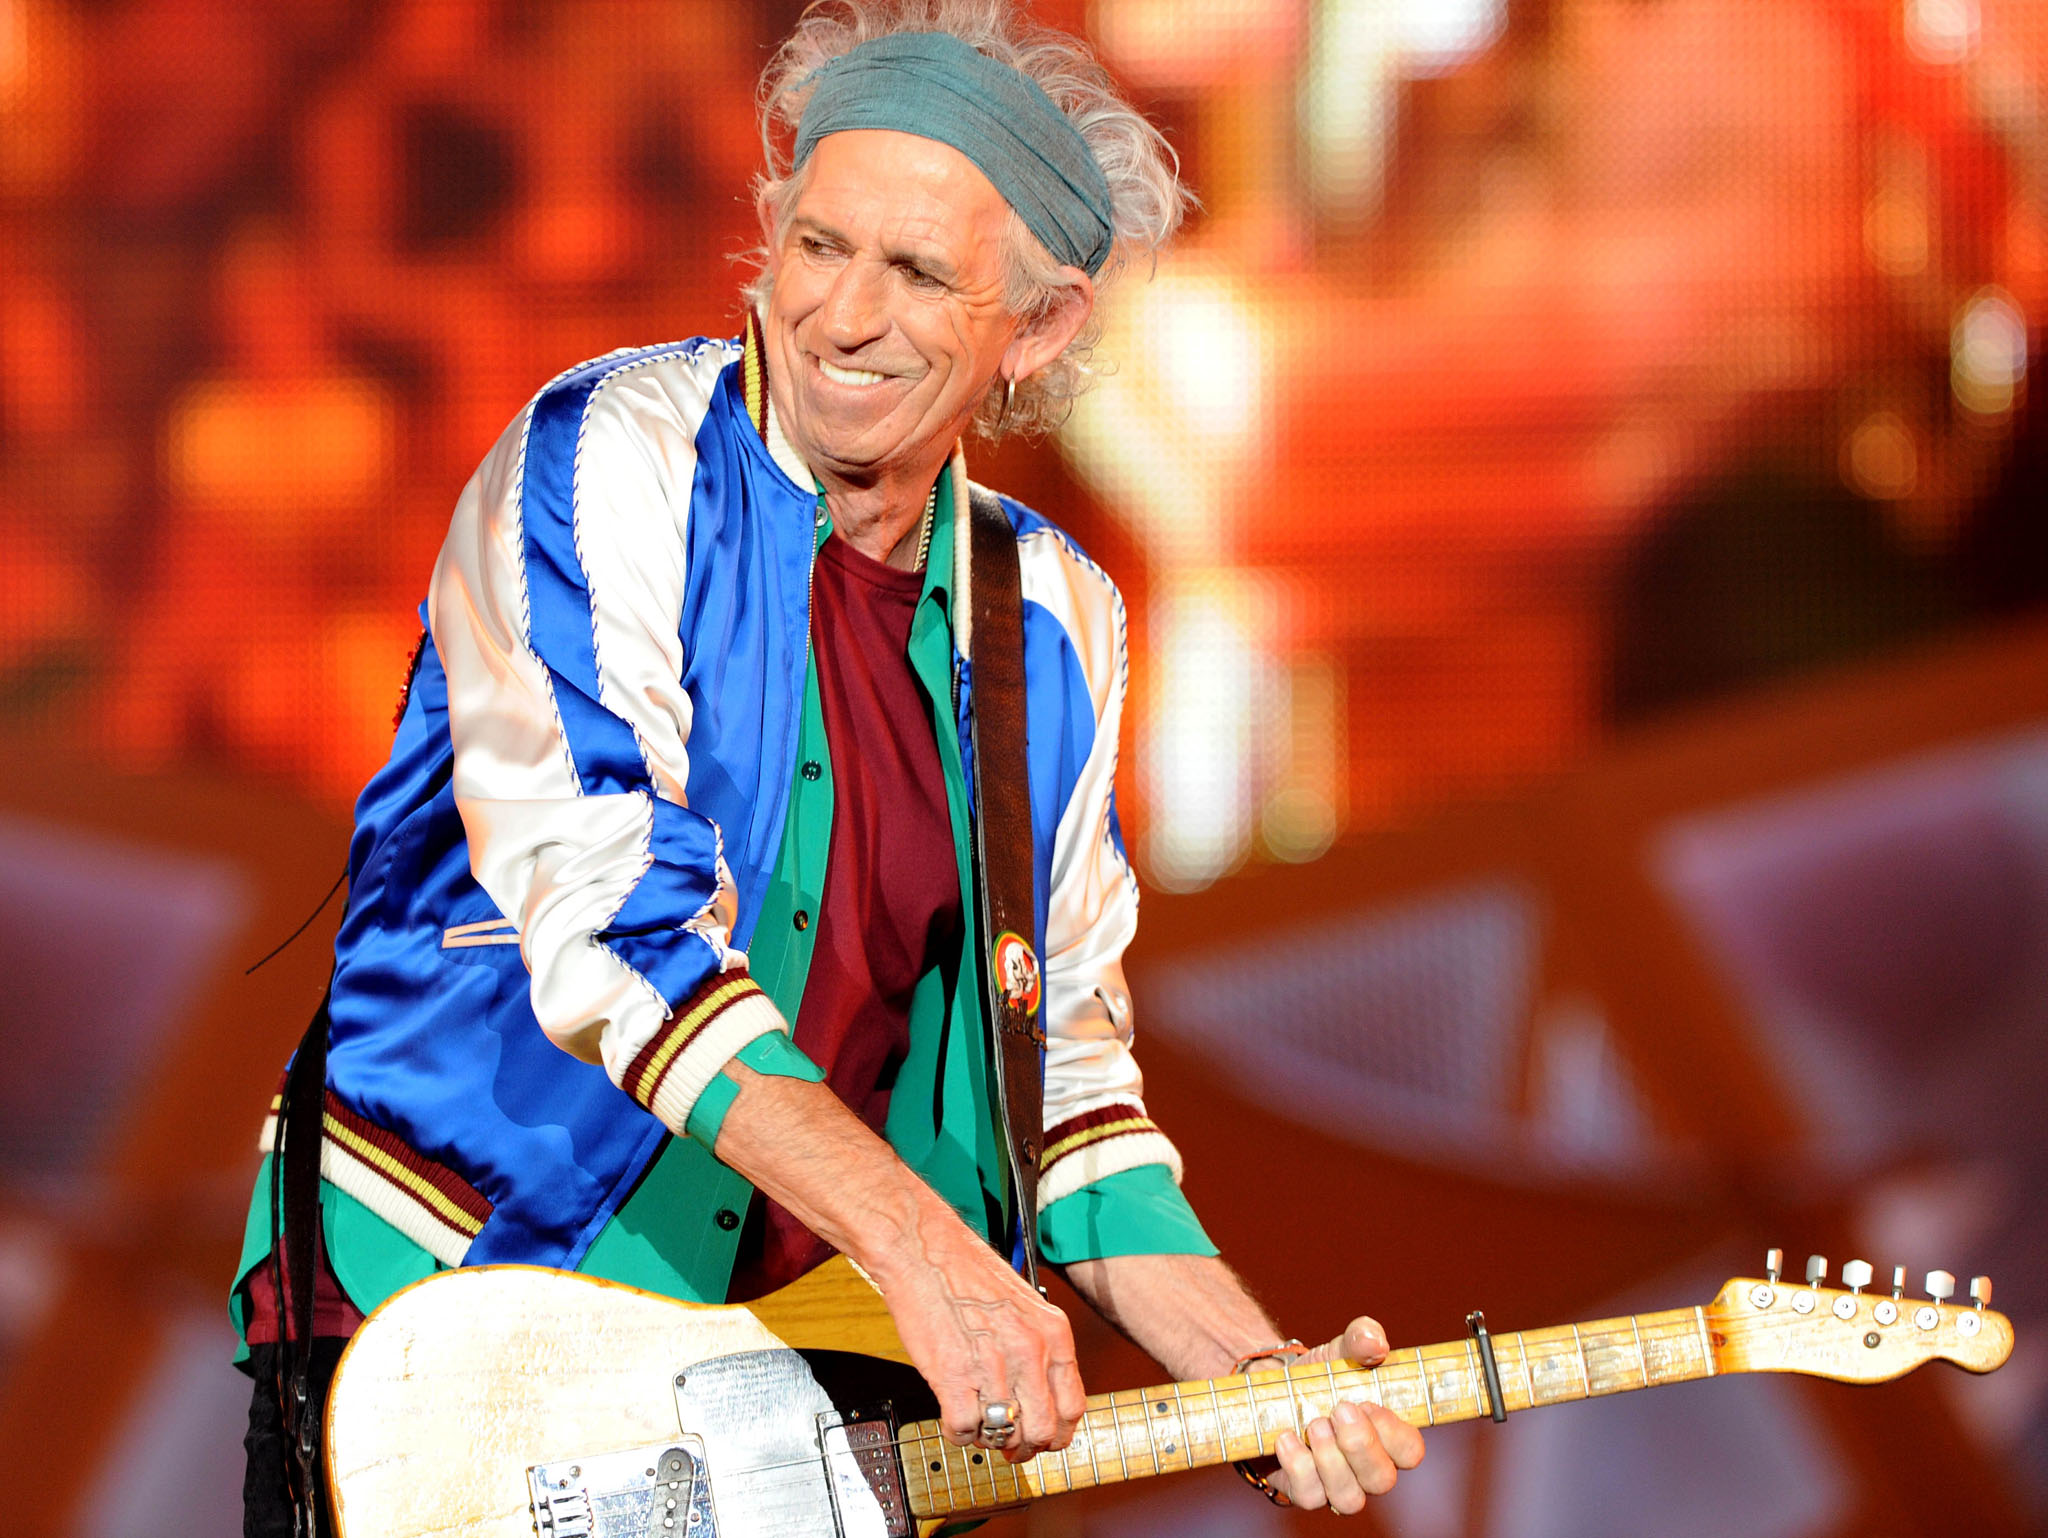 720x1580 Resolution keith richards, the rolling stones, guitarist ...